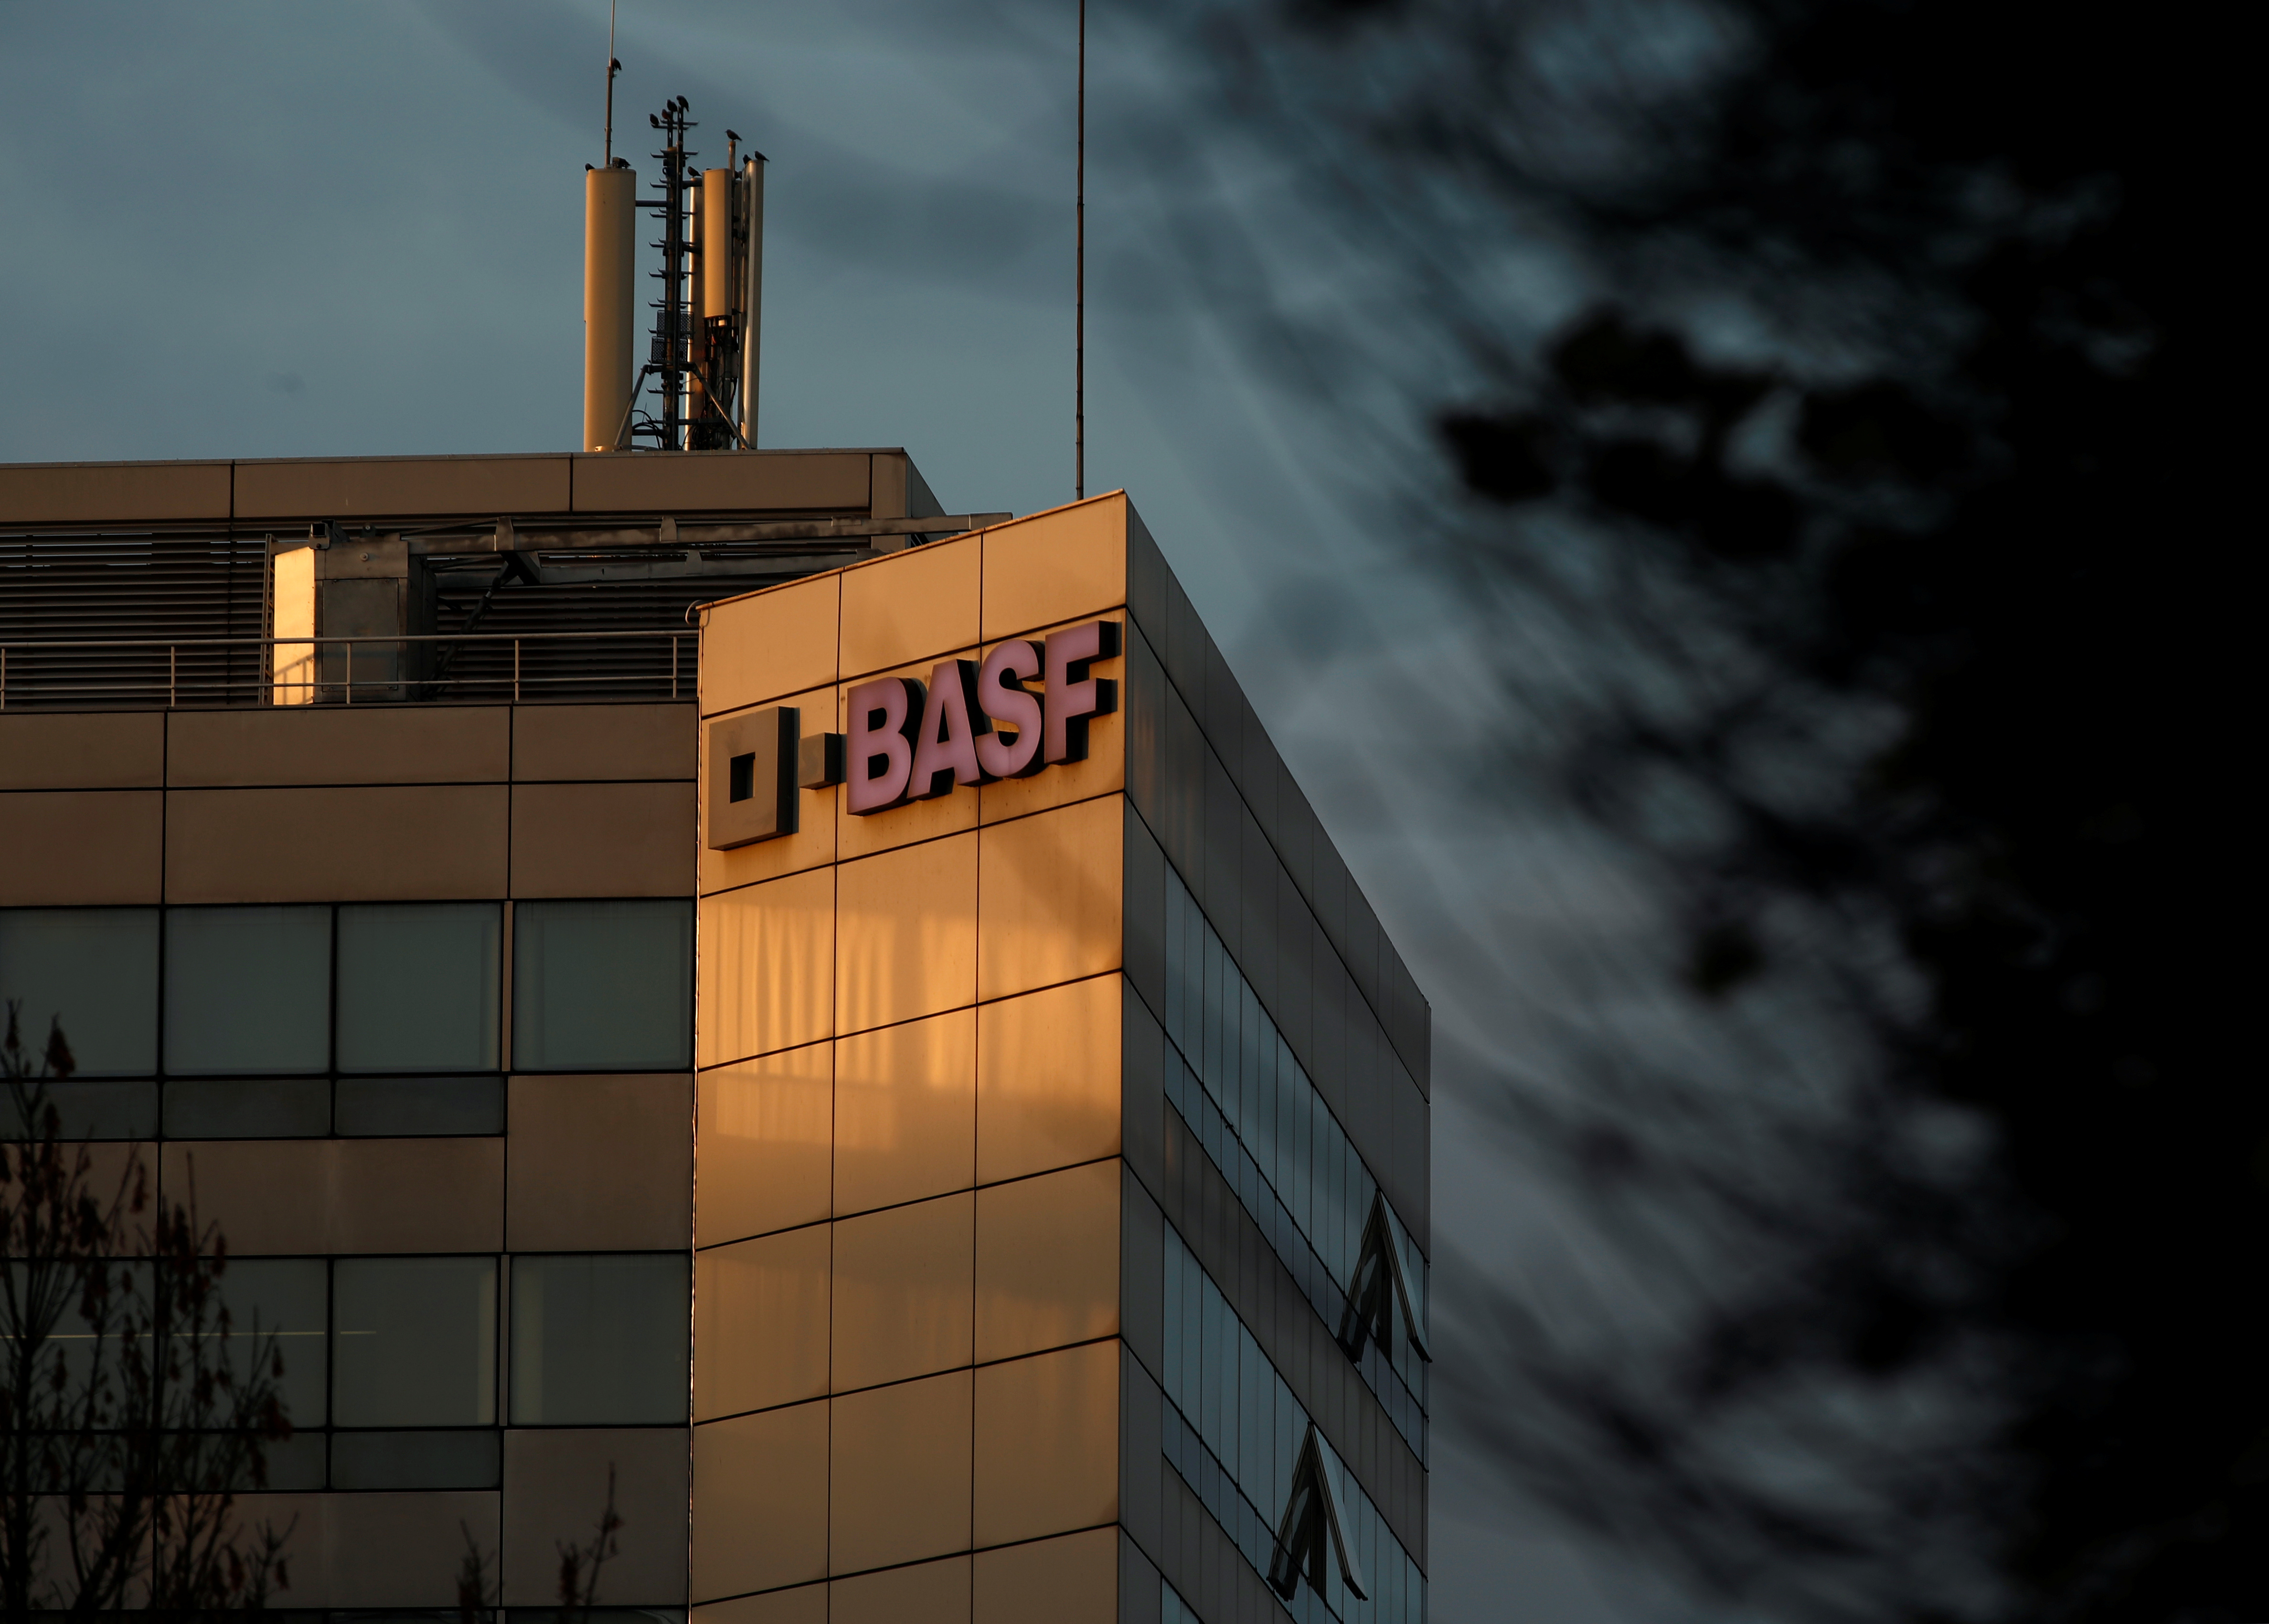 The chemical company BASF building in Levallois-Perret is seen at sunset